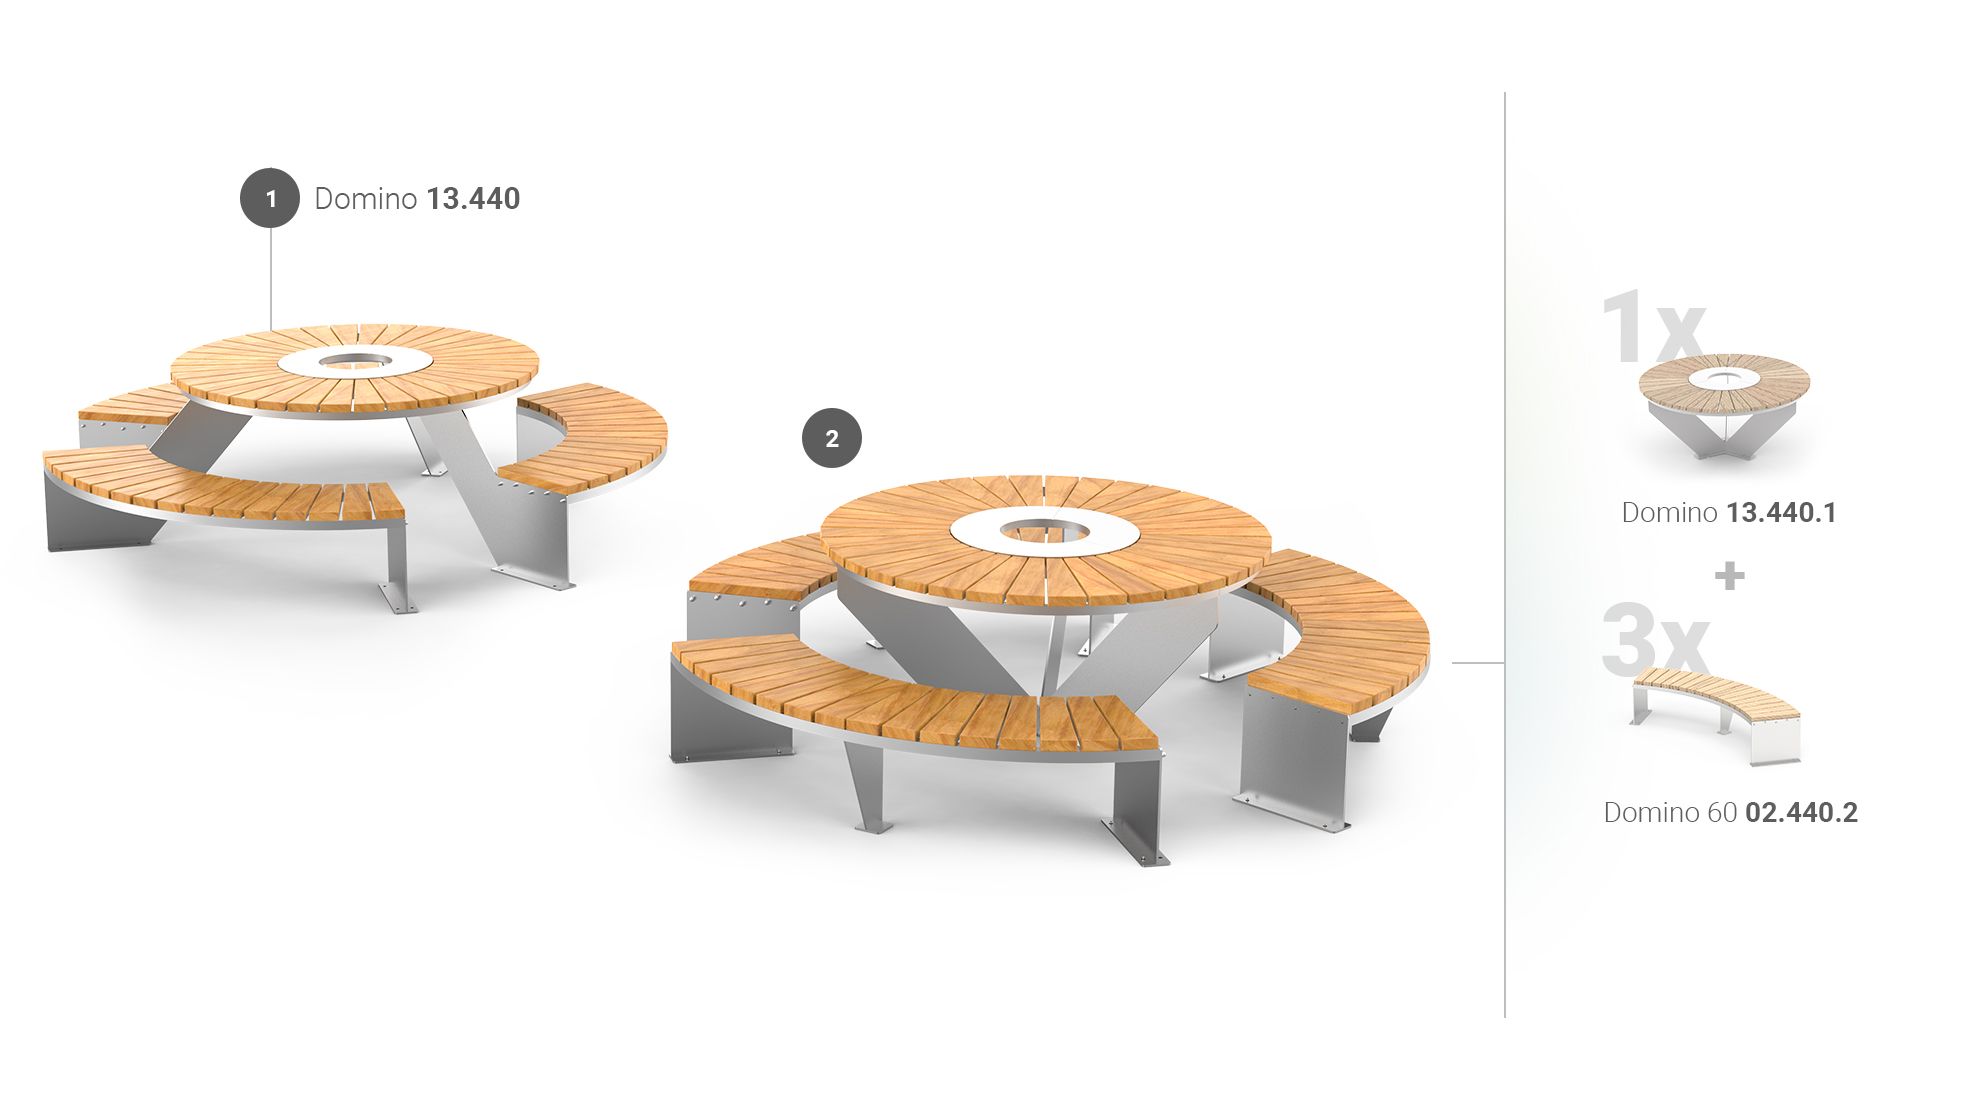 Outdoor round picnic tables in stainless steel and hardwood